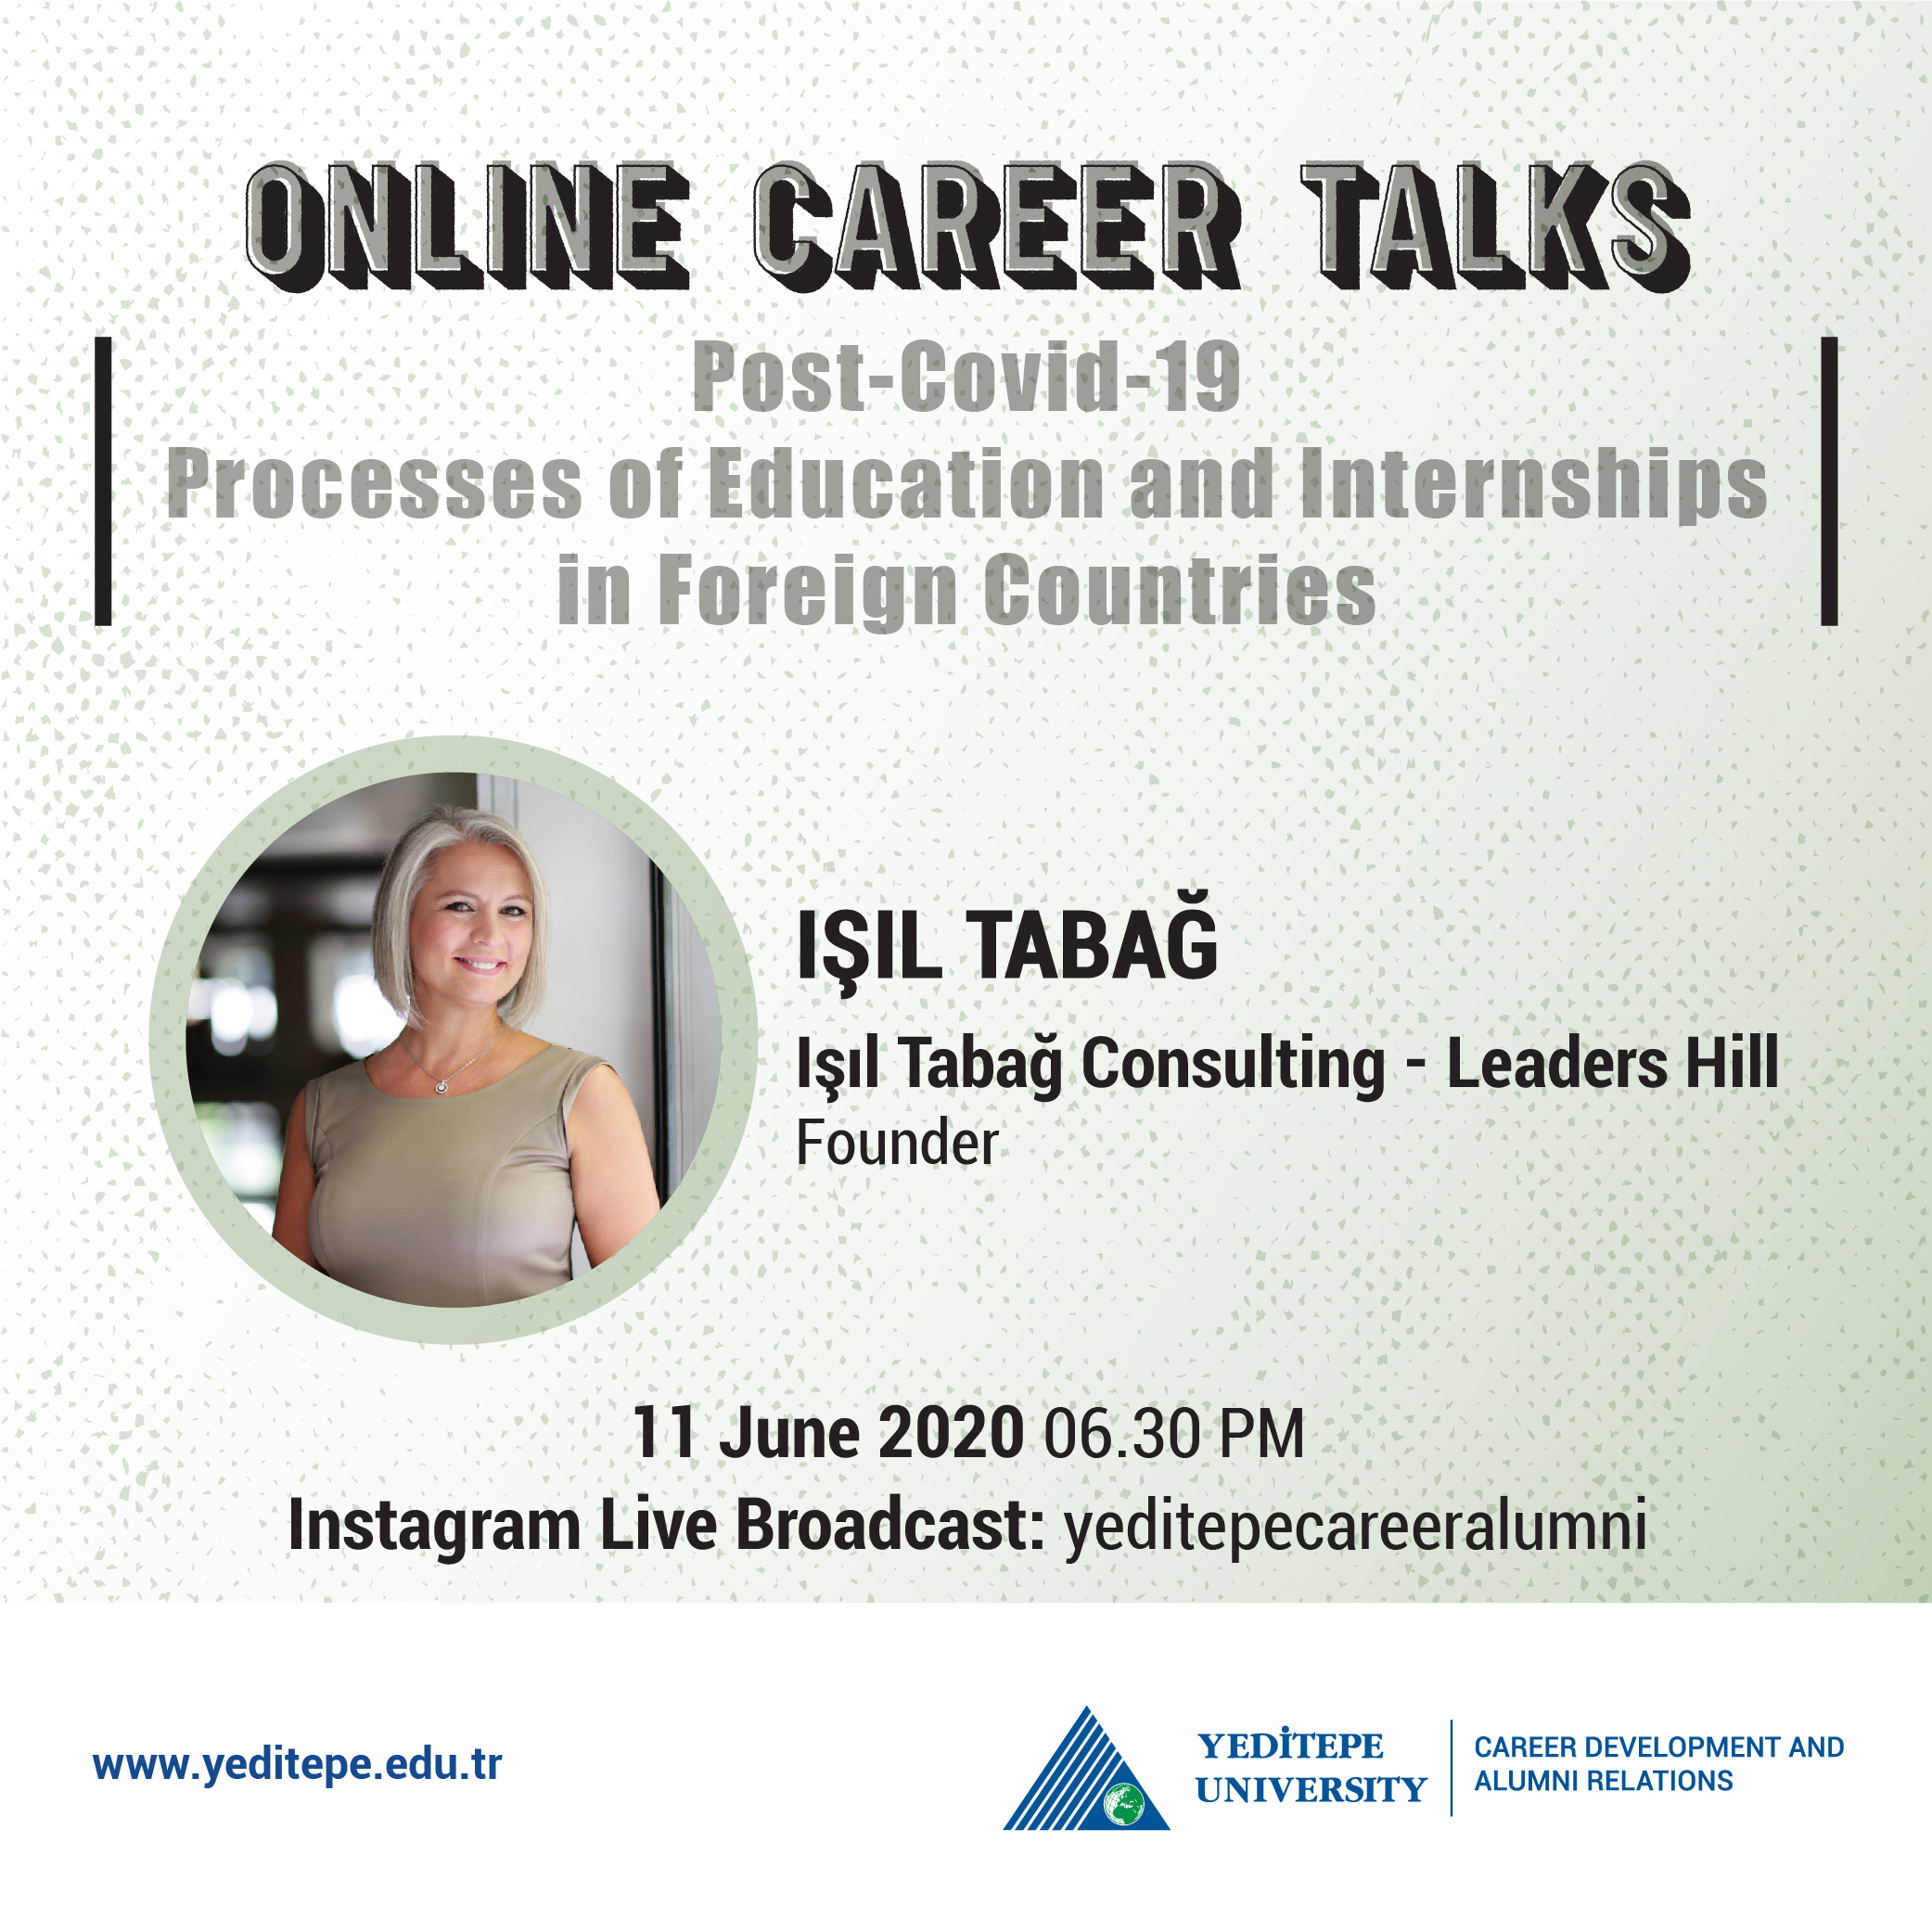 Online Career Talks - Post-Covid-19 Processes of Education and Internships in Foreign Countries